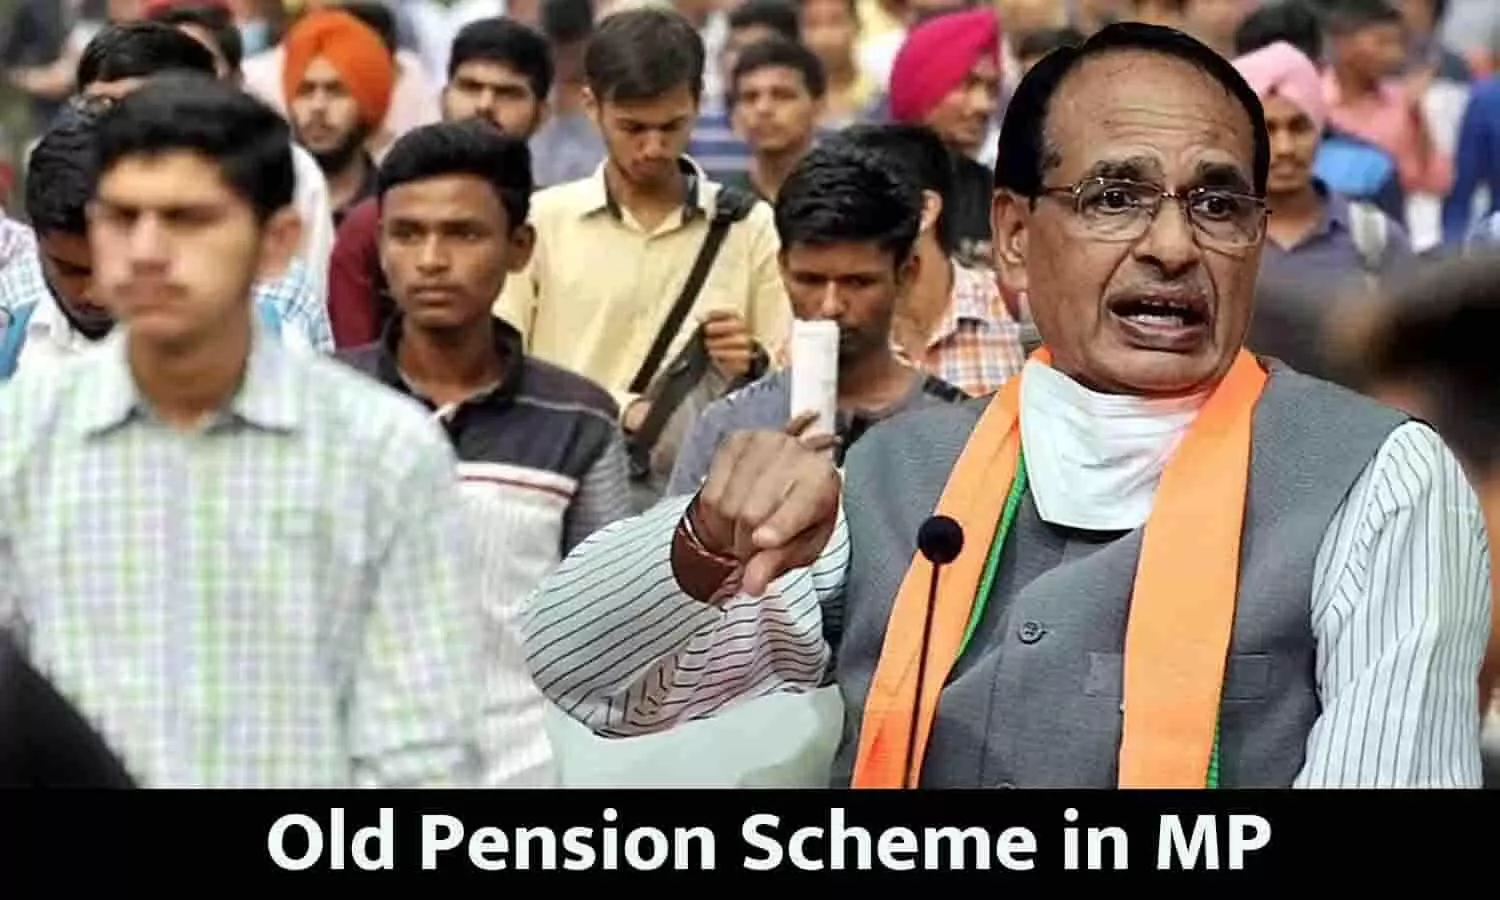 Old Pension Scheme in MP